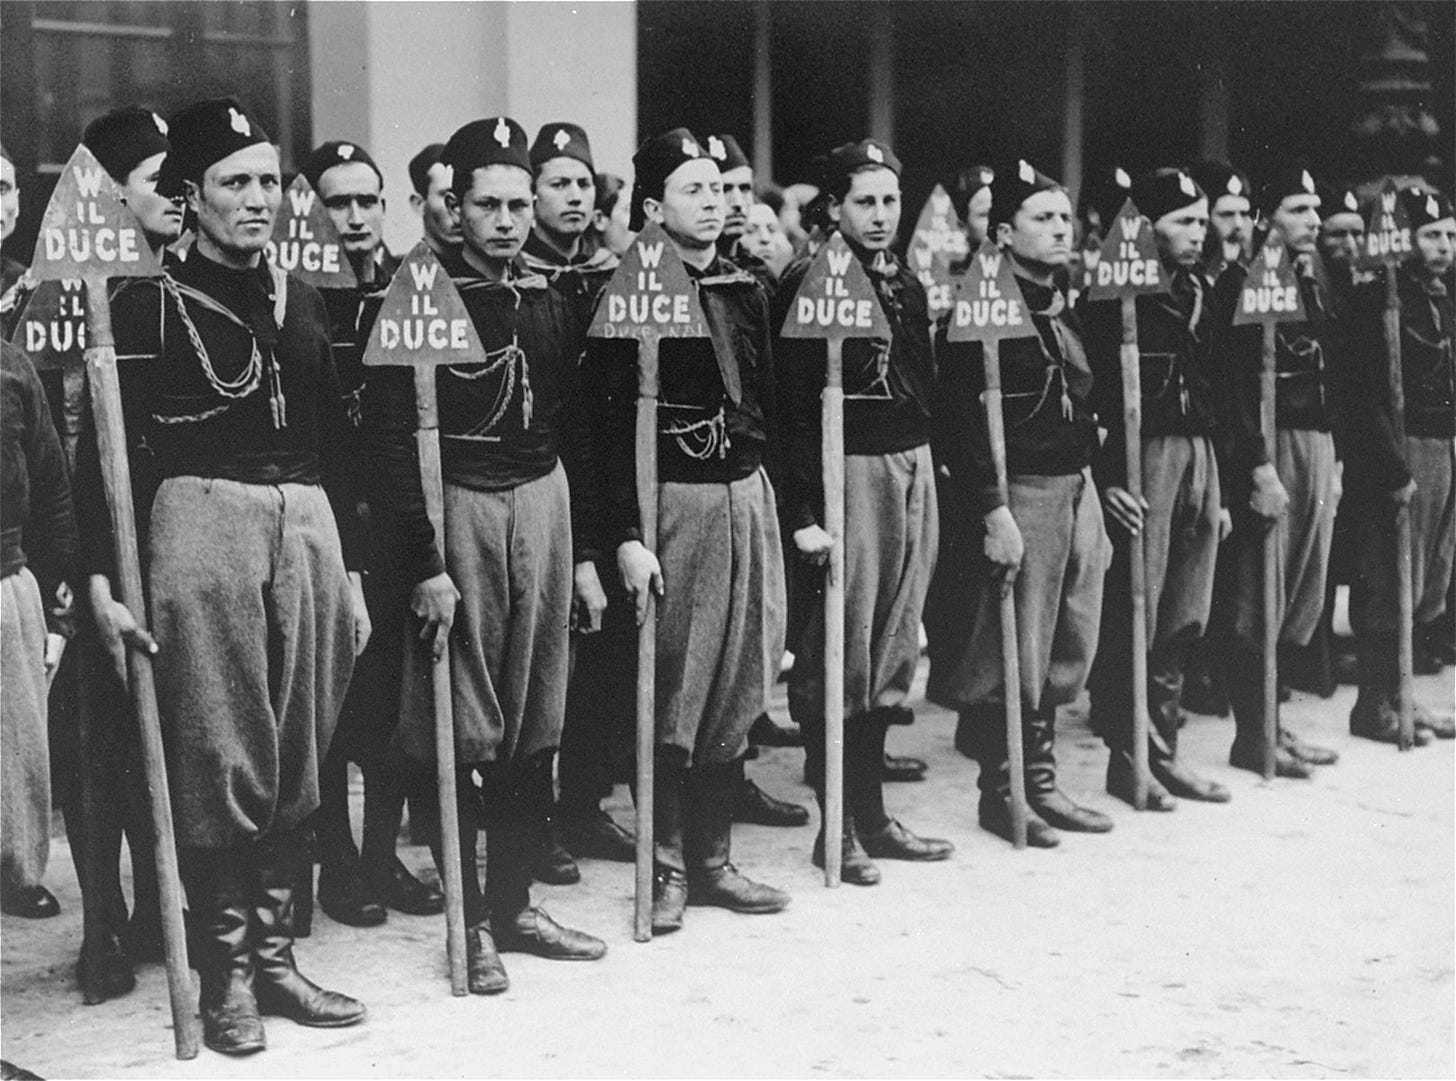 A unit of Italian blackshirts stands at attention holding spades during a fascist demonstration.